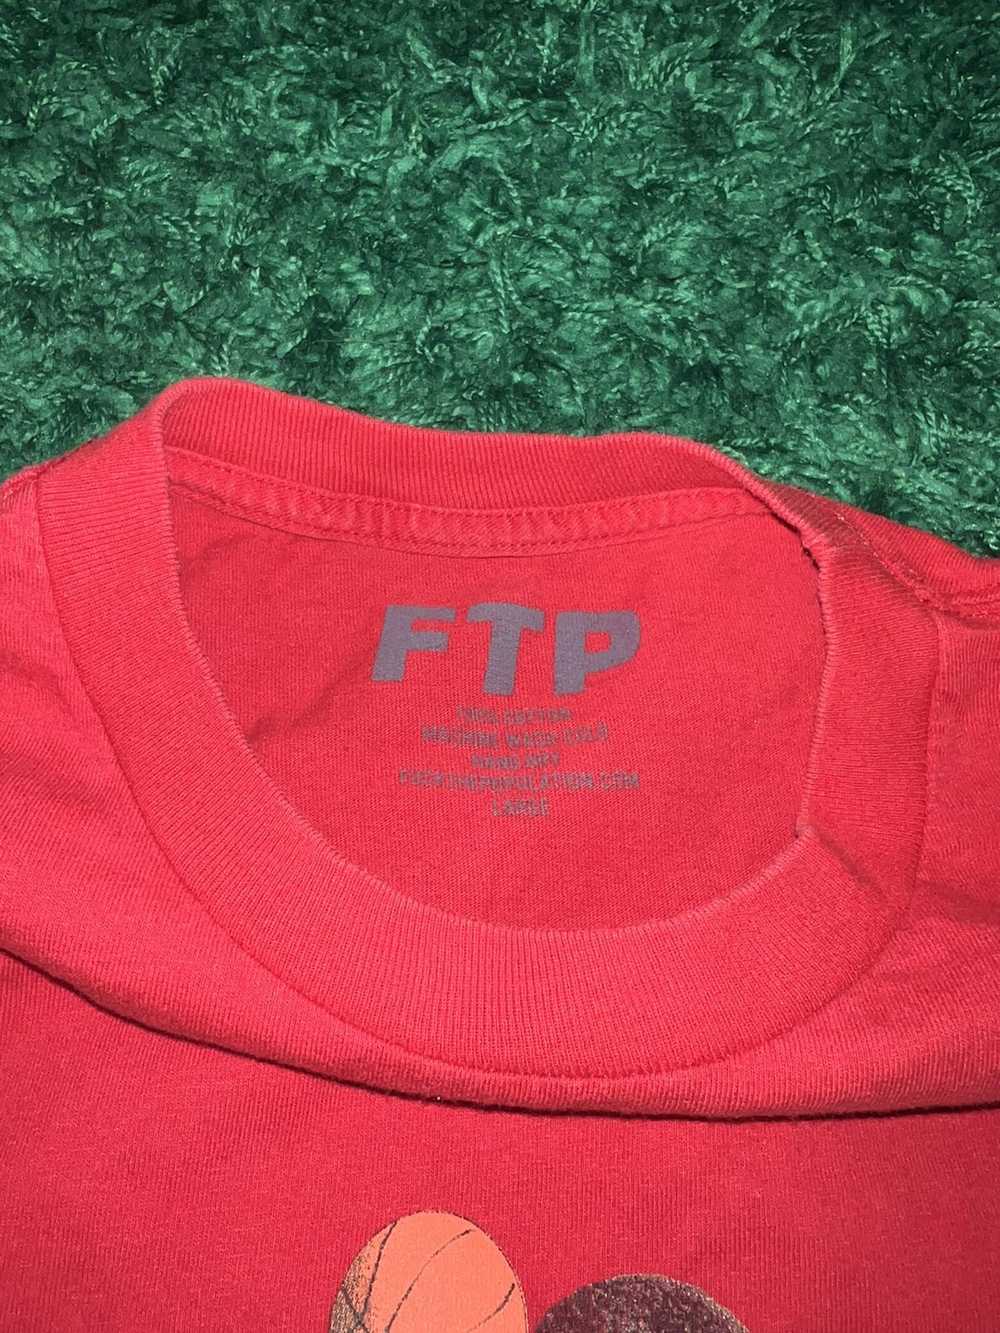 Fuck The Population FTP Harlem Tee Red Large - image 3